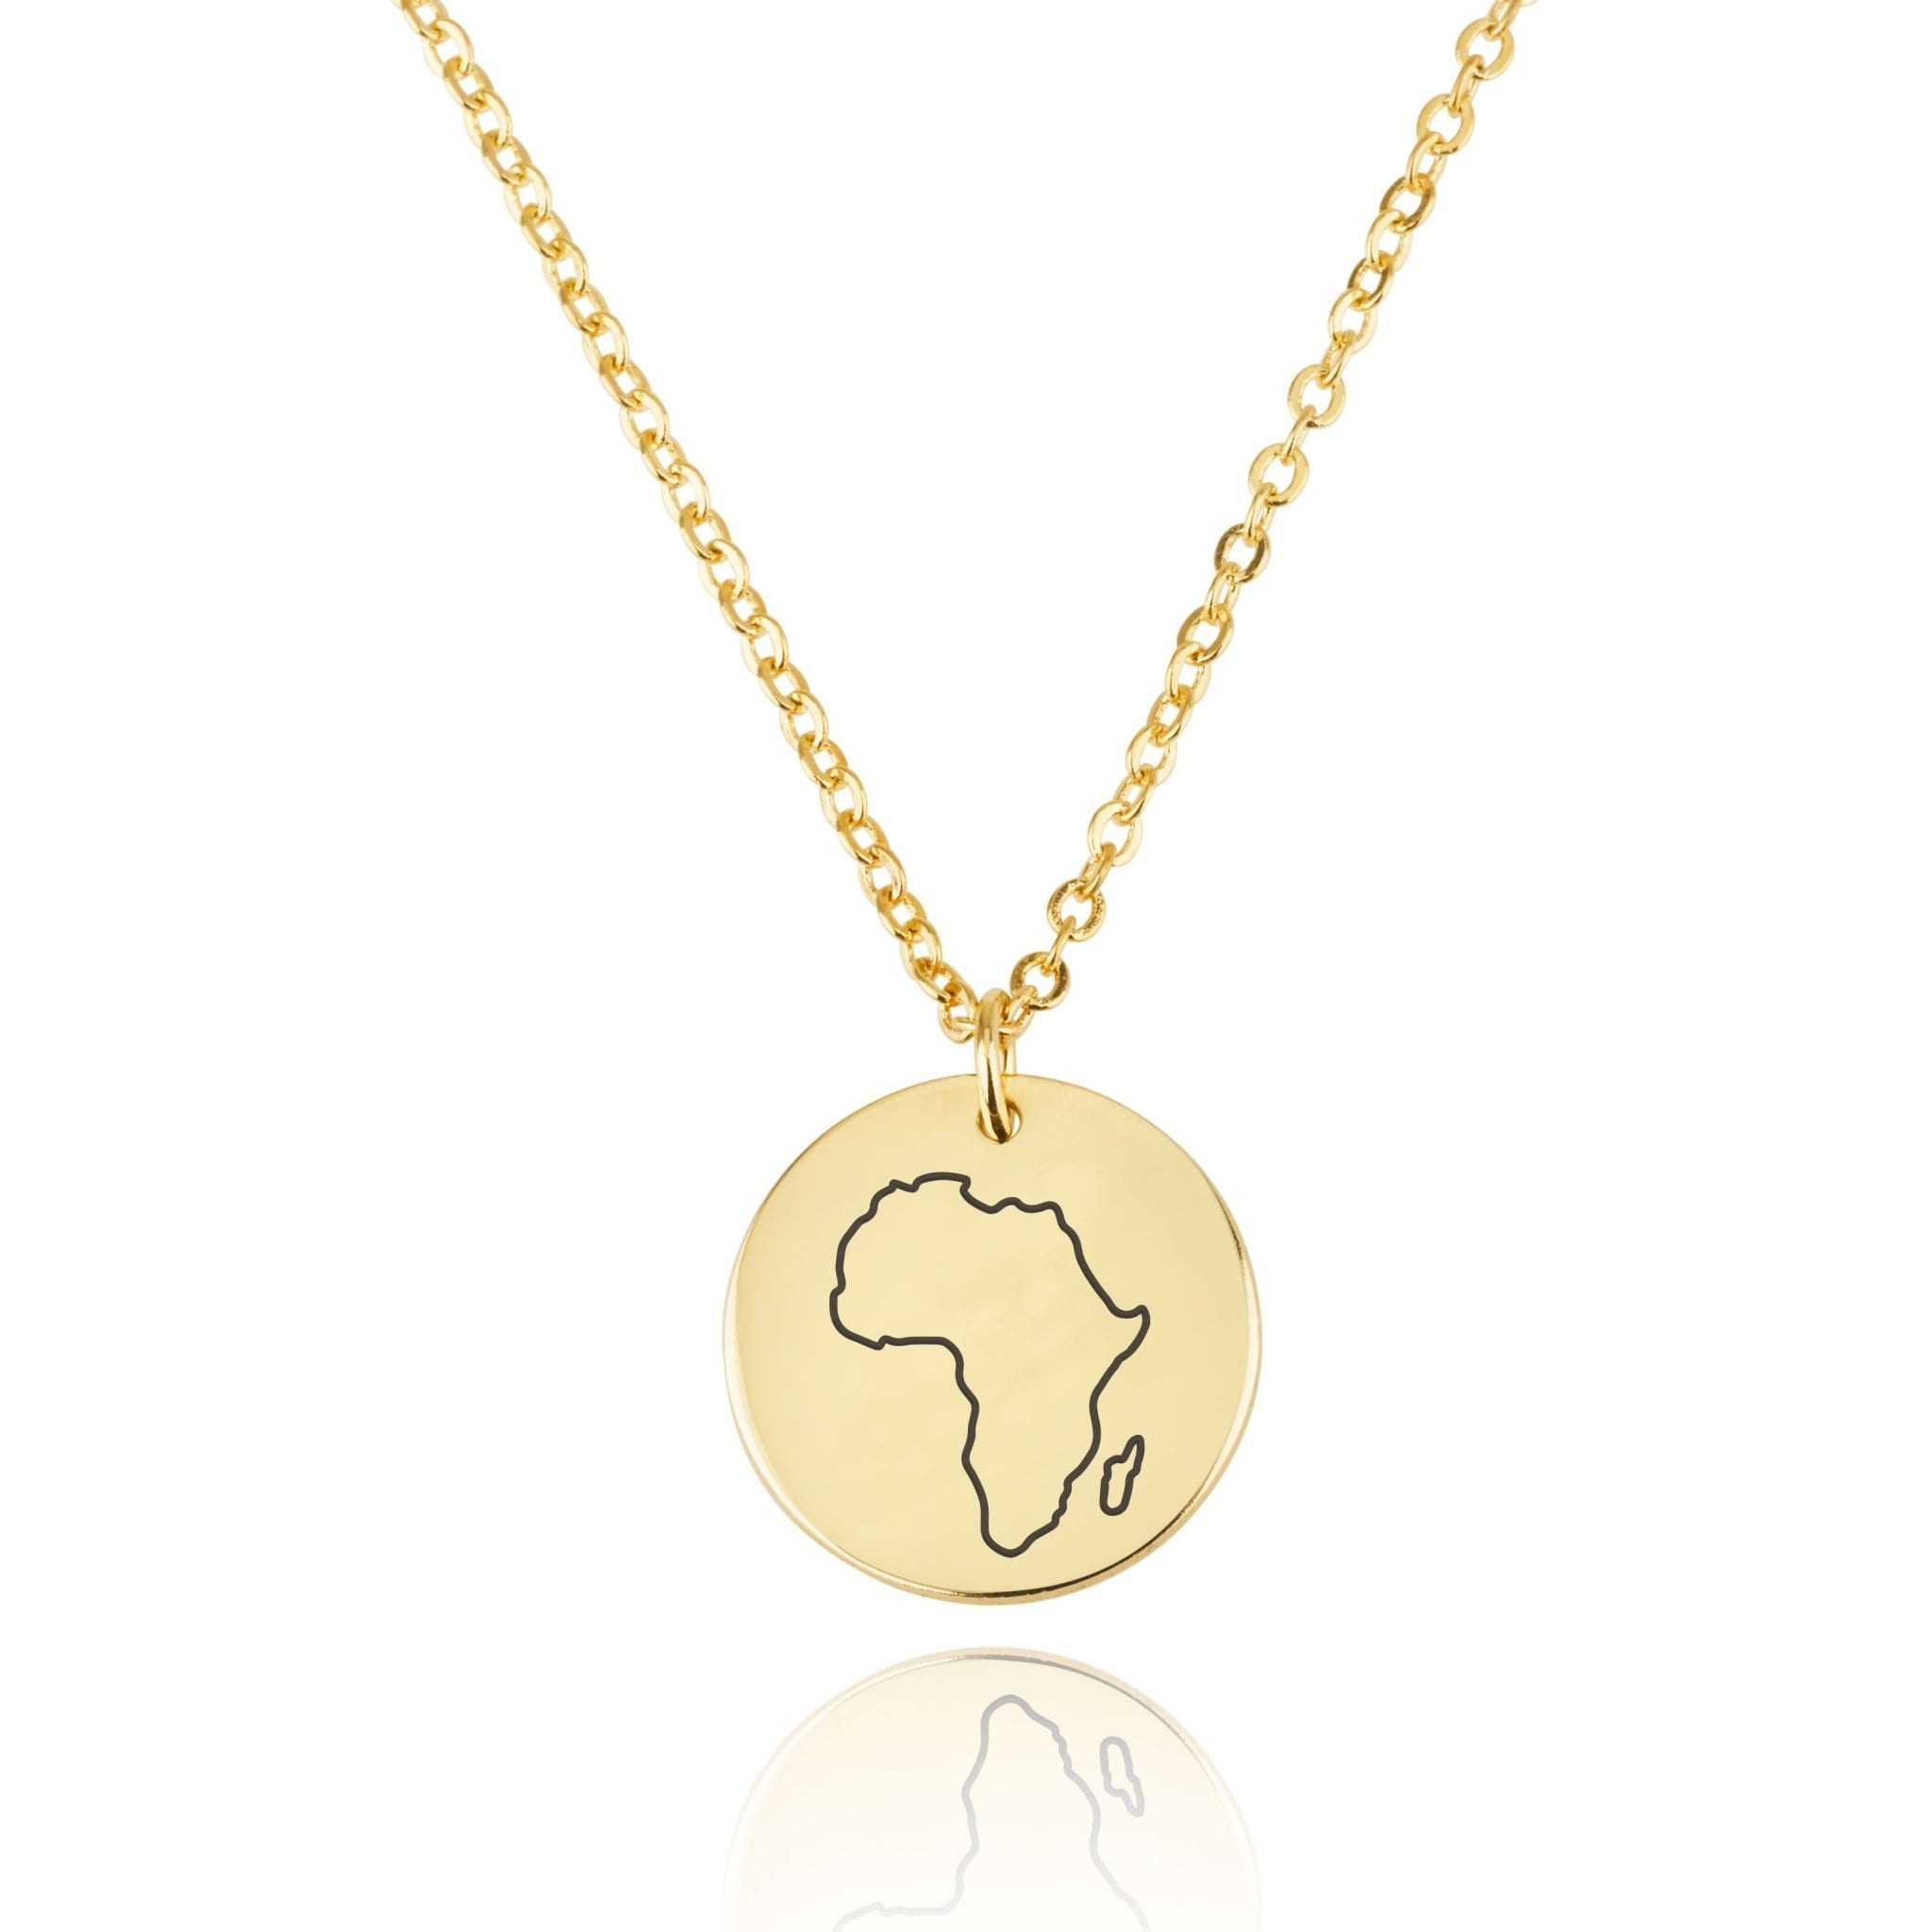 Africa Map Engraving Disc Necklace - Beleco Jewelry